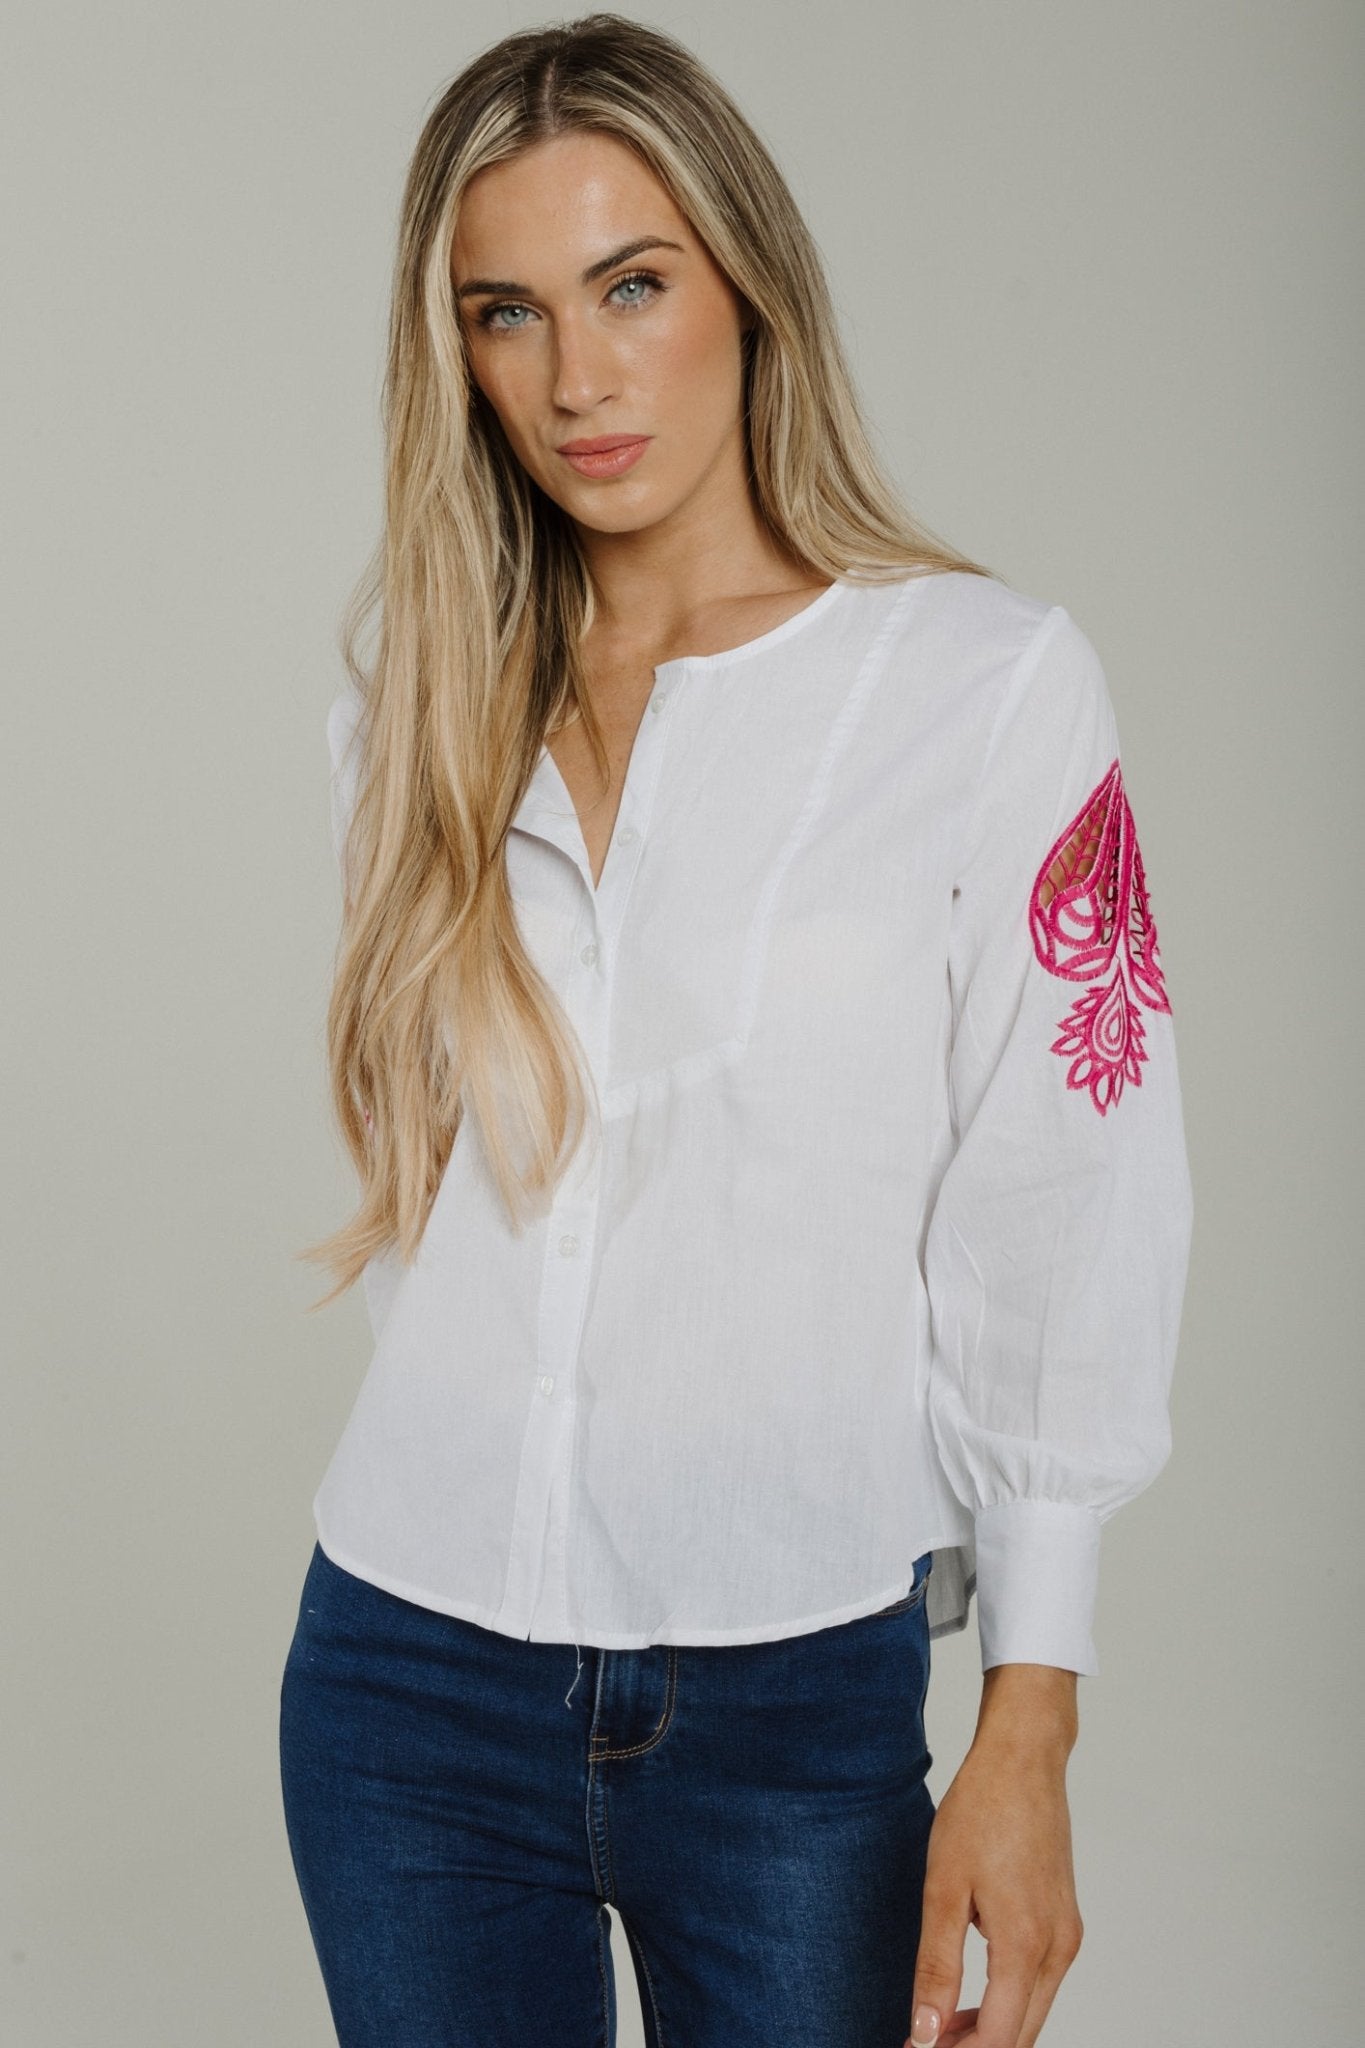 Sally Button Front Embroidered Top In White - The Walk in Wardrobe